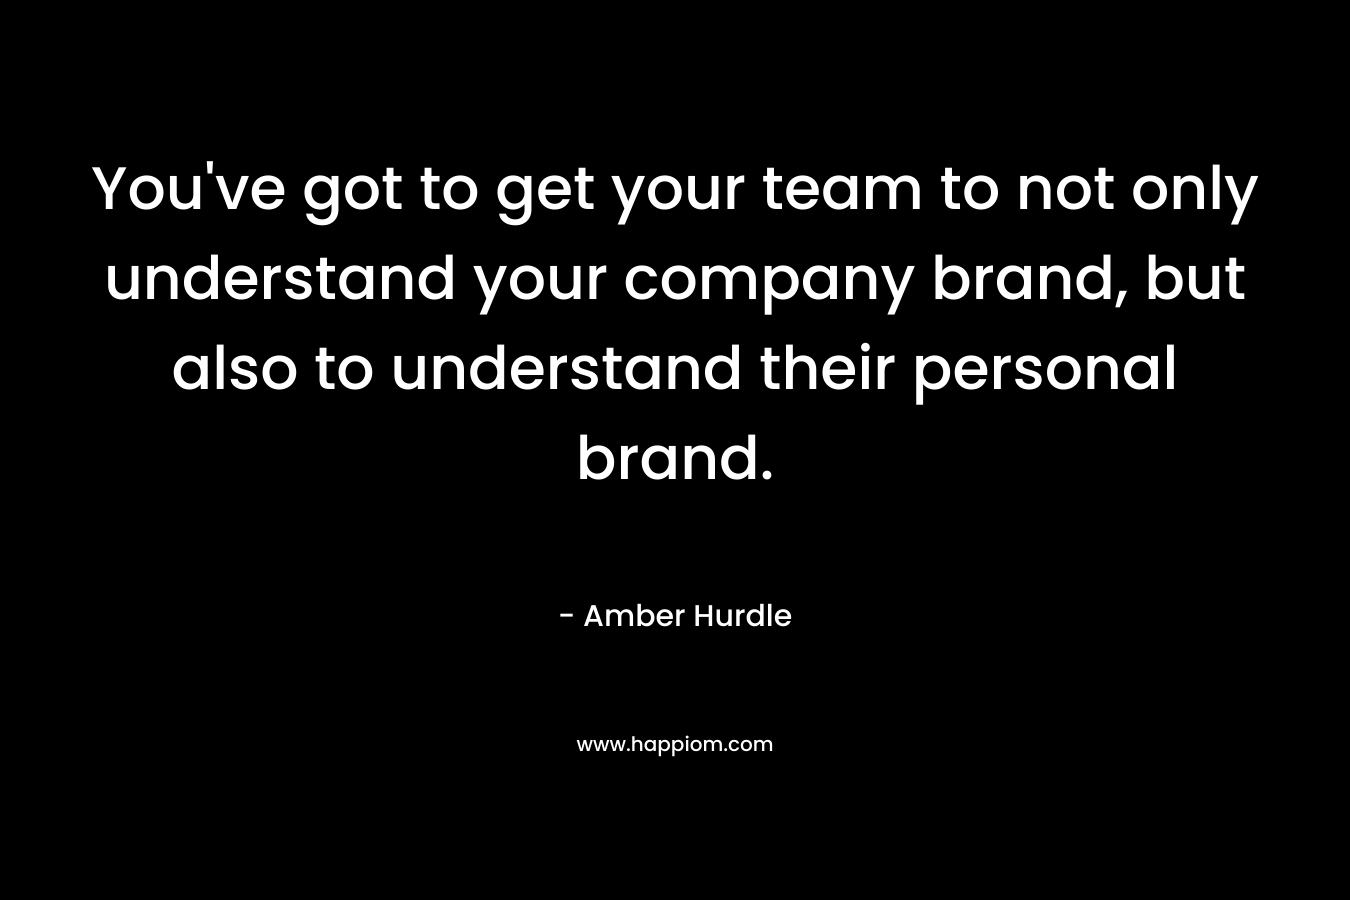 You've got to get your team to not only understand your company brand, but also to understand their personal brand.